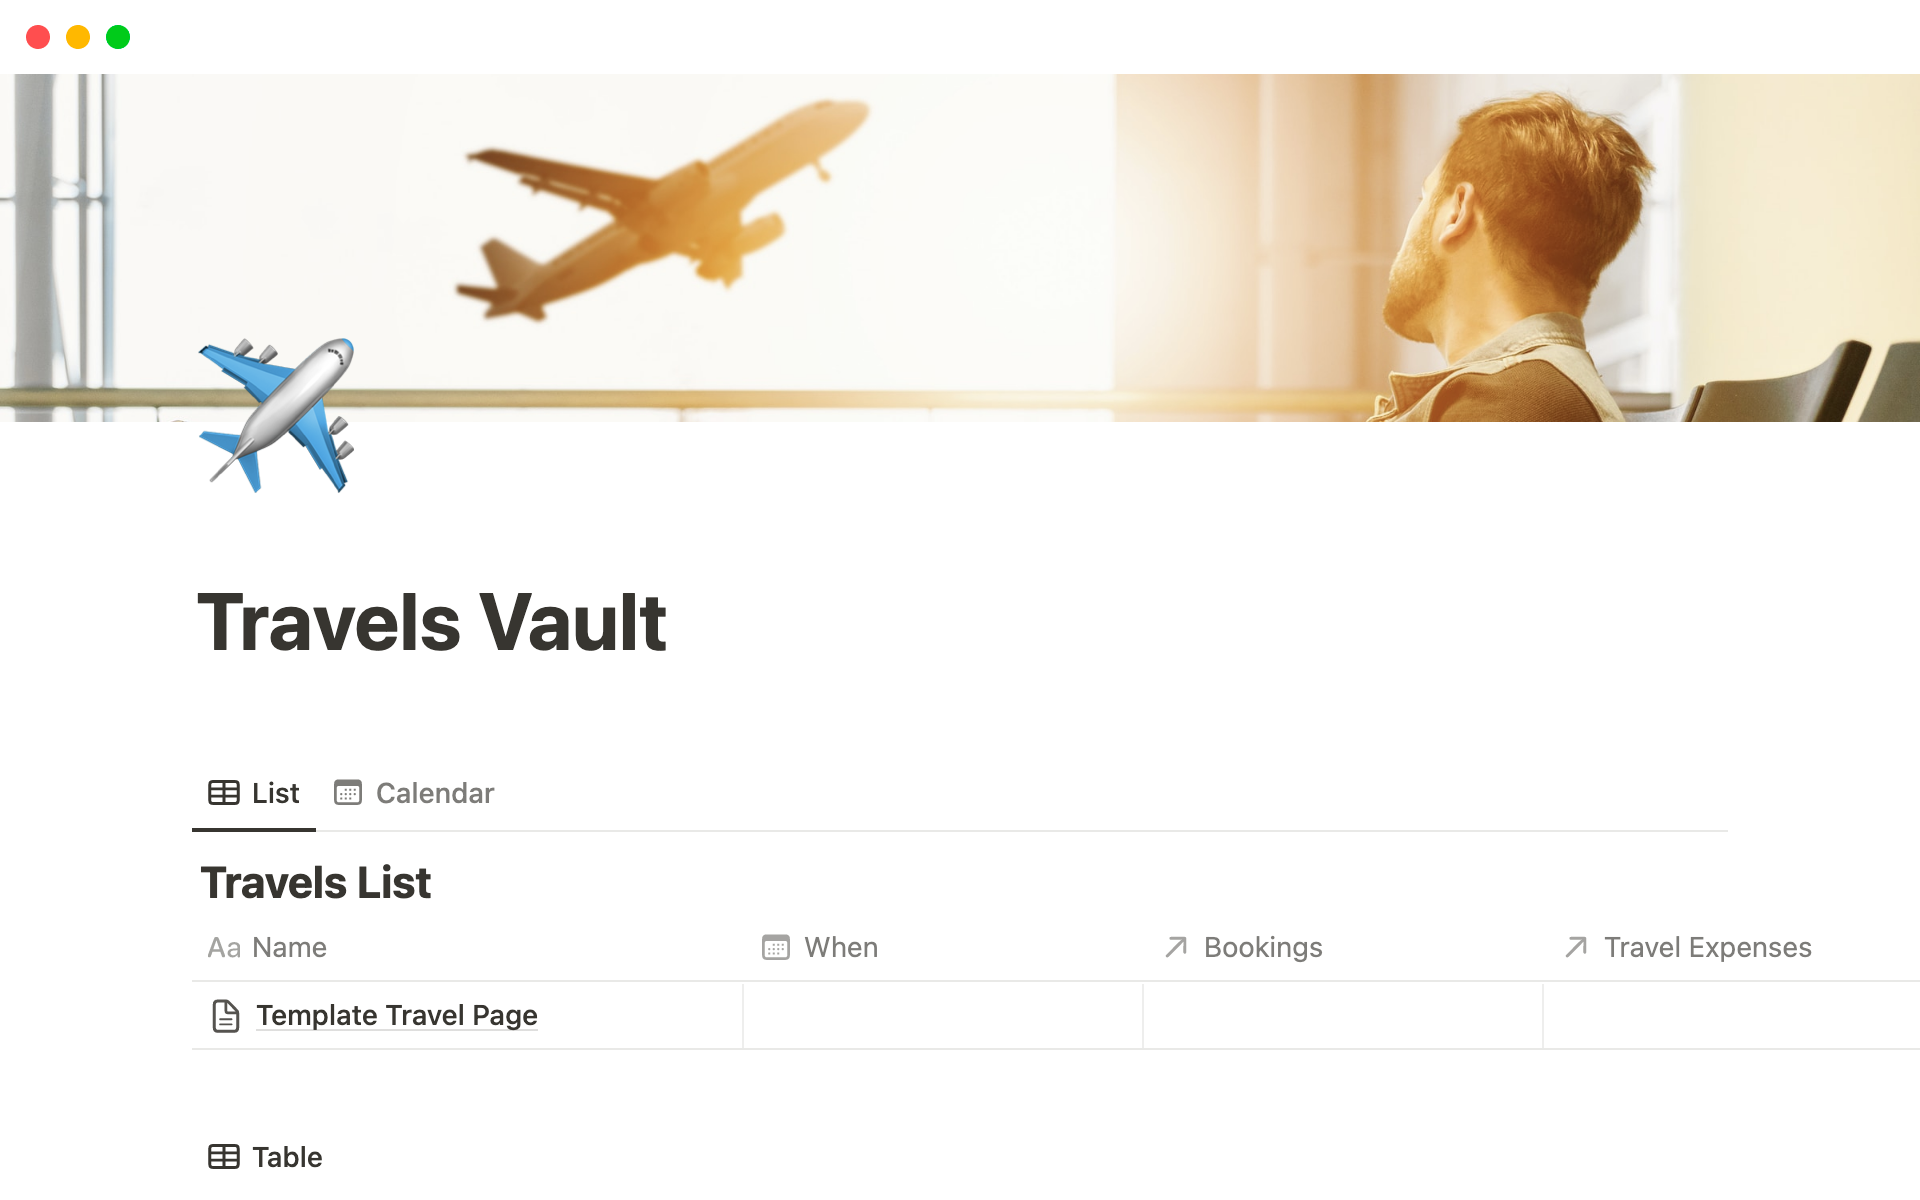 The Travels Vault Notion Template seamlessly organizes all your travel plans, bookings, expenses, and activities, transforming your travel experiences into beautifully chronicled adventures.